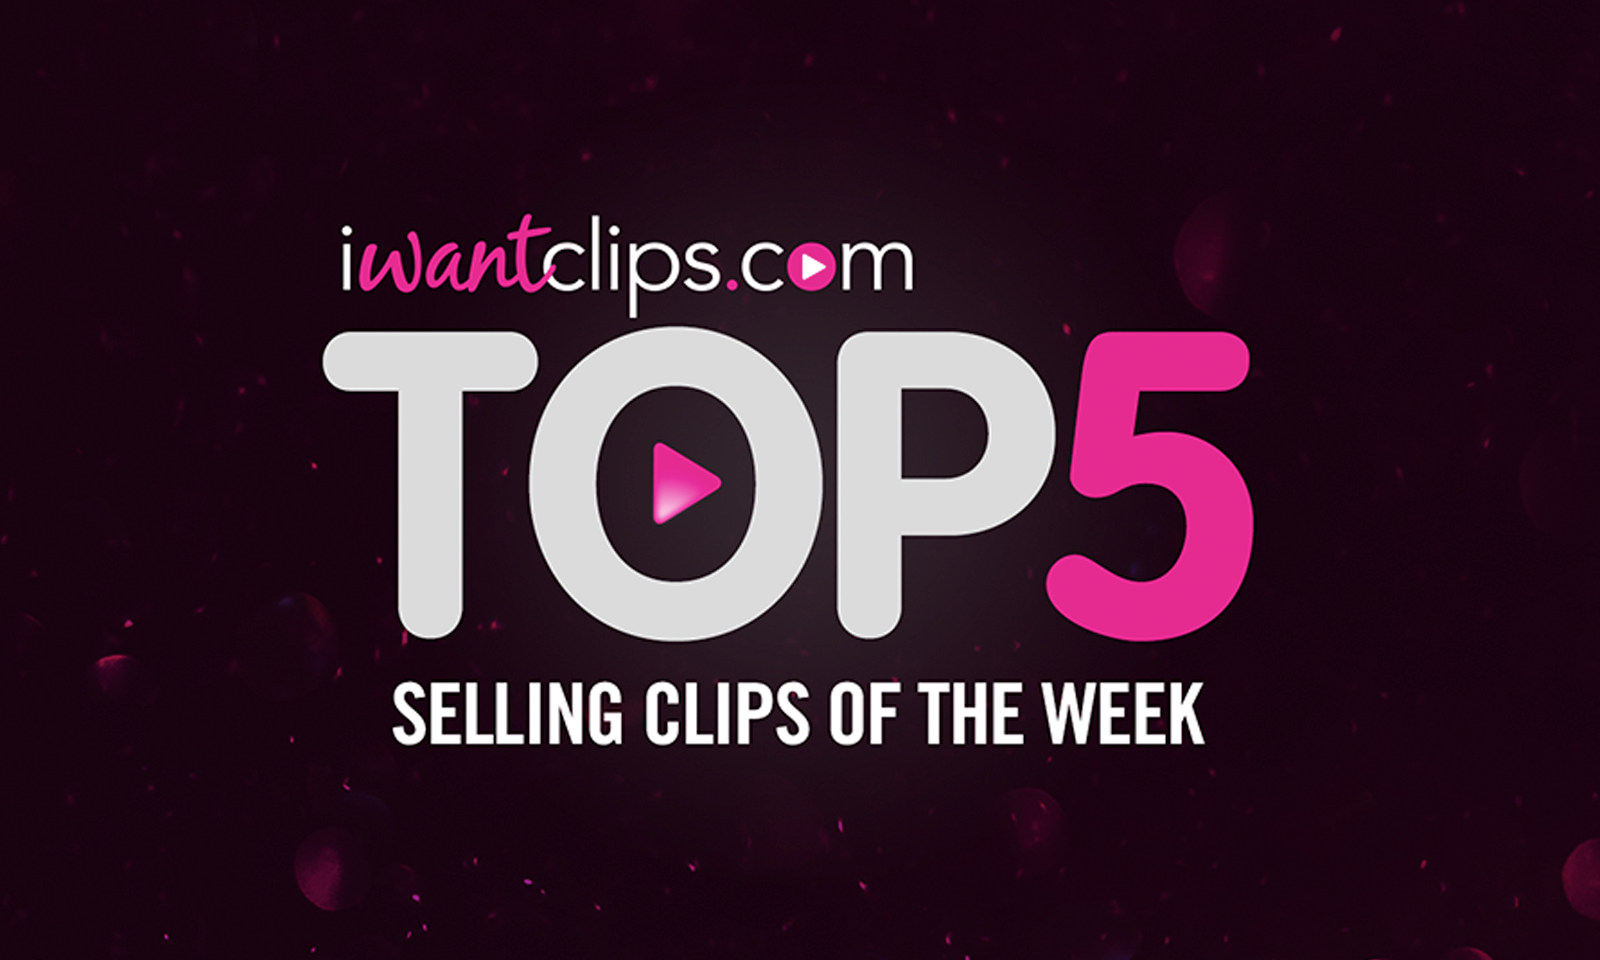 Artists With Unique Themes A Hit on iWantClips